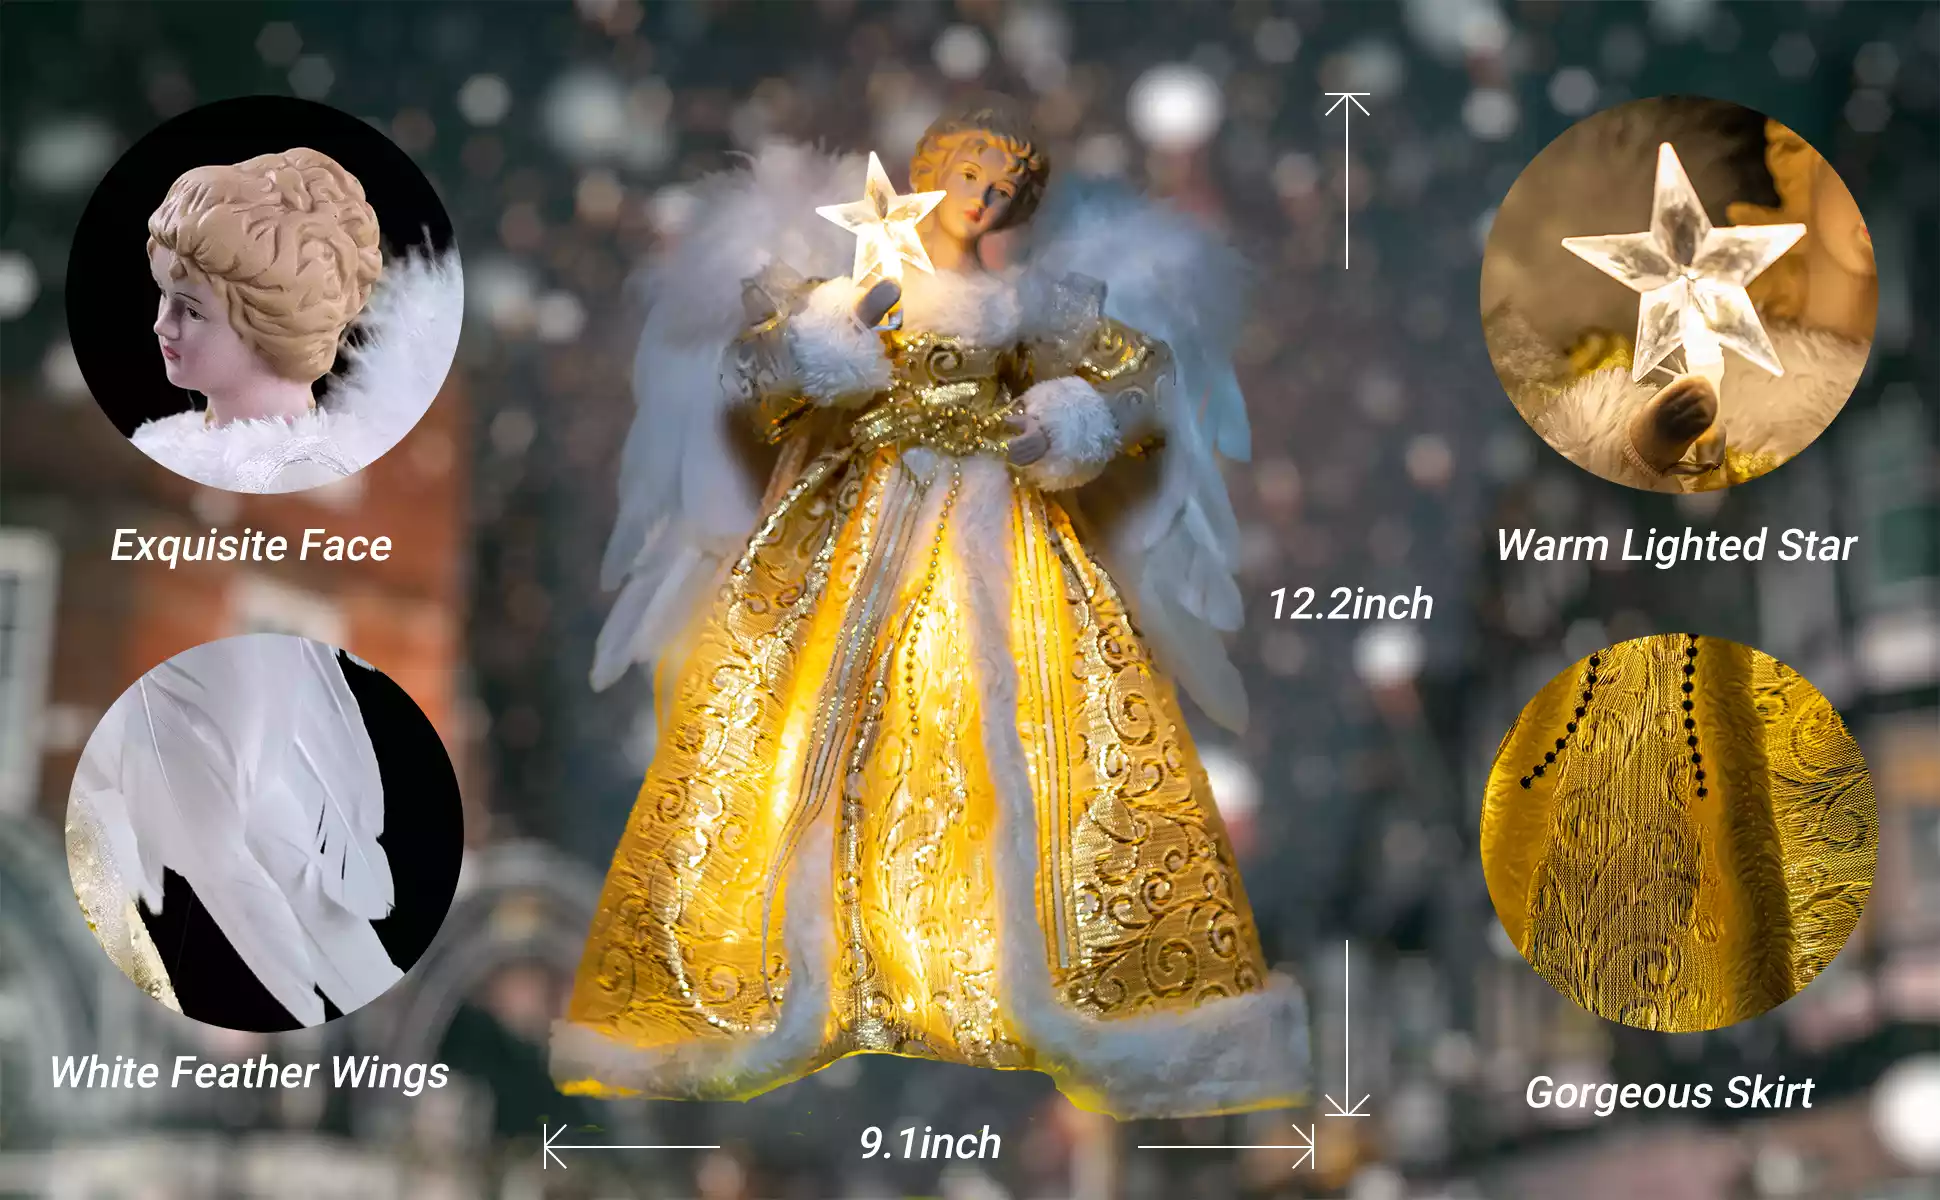 The angel tree topper has an exquisite face, white feather wings, and a warm, lighted star held